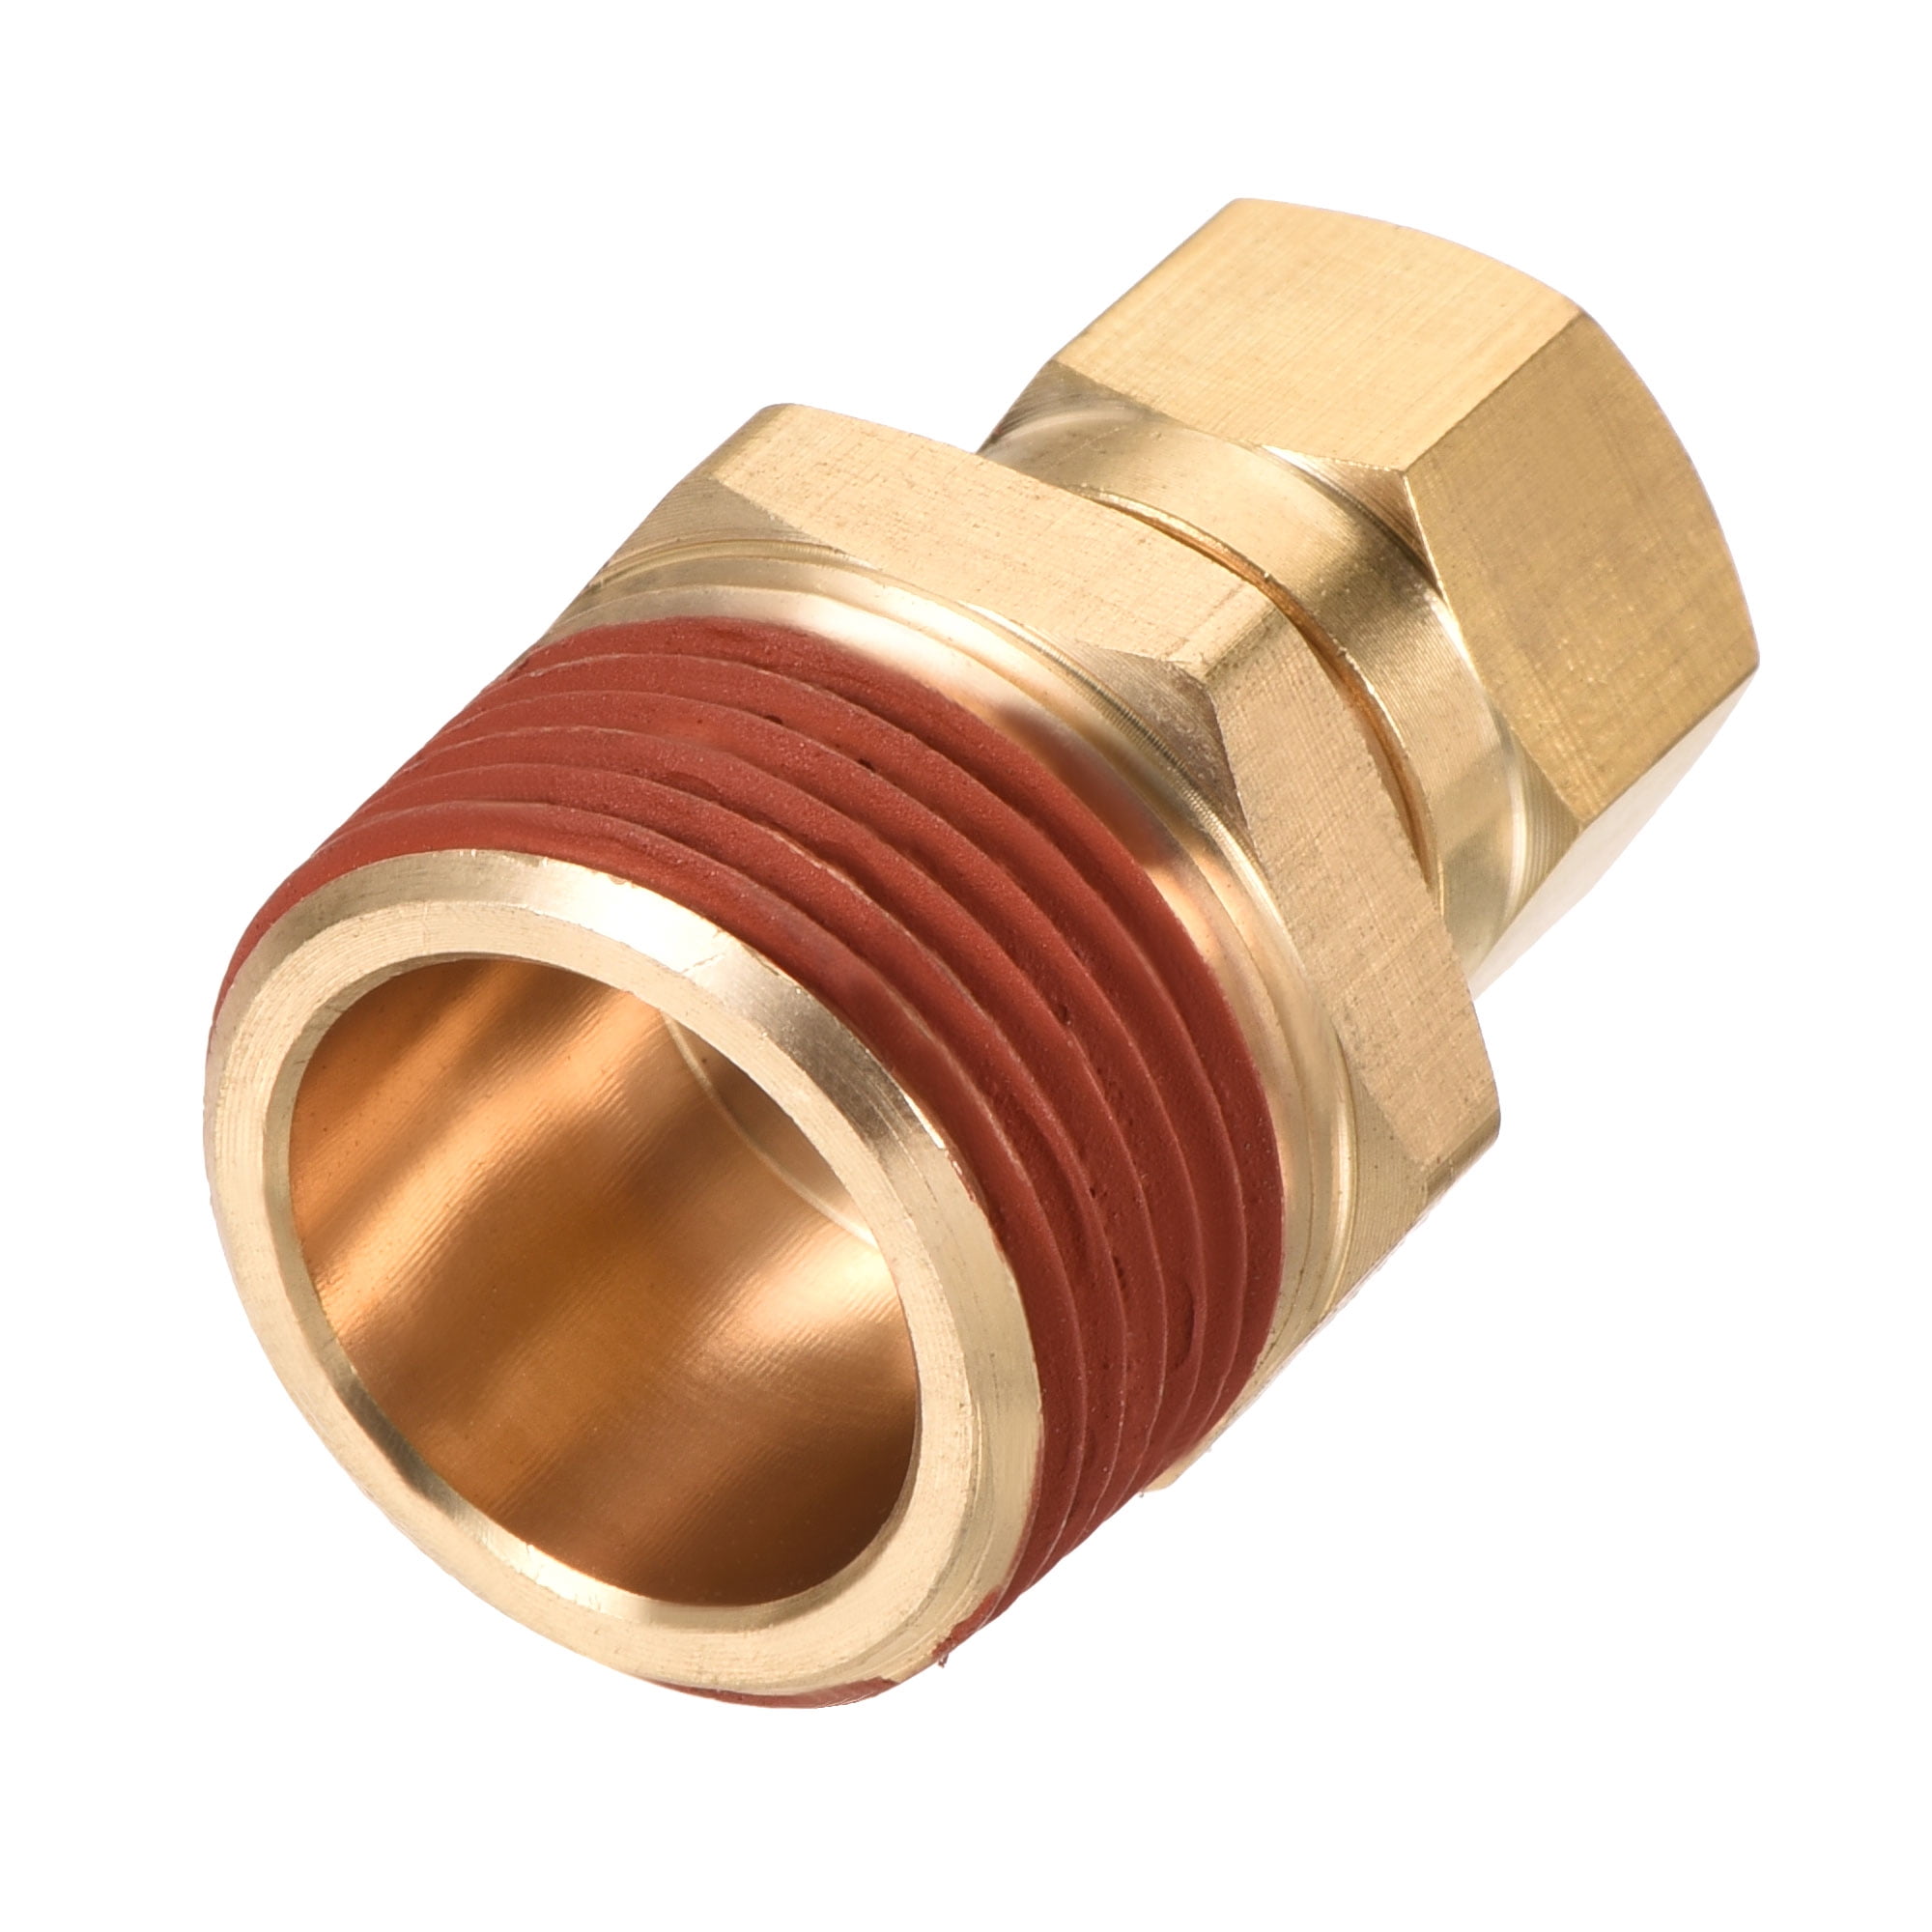 ChillWaves Brass Compression Tube Fitting, 3/16 OD x 3/16 OD Compression  Union Connector(10-PACK)